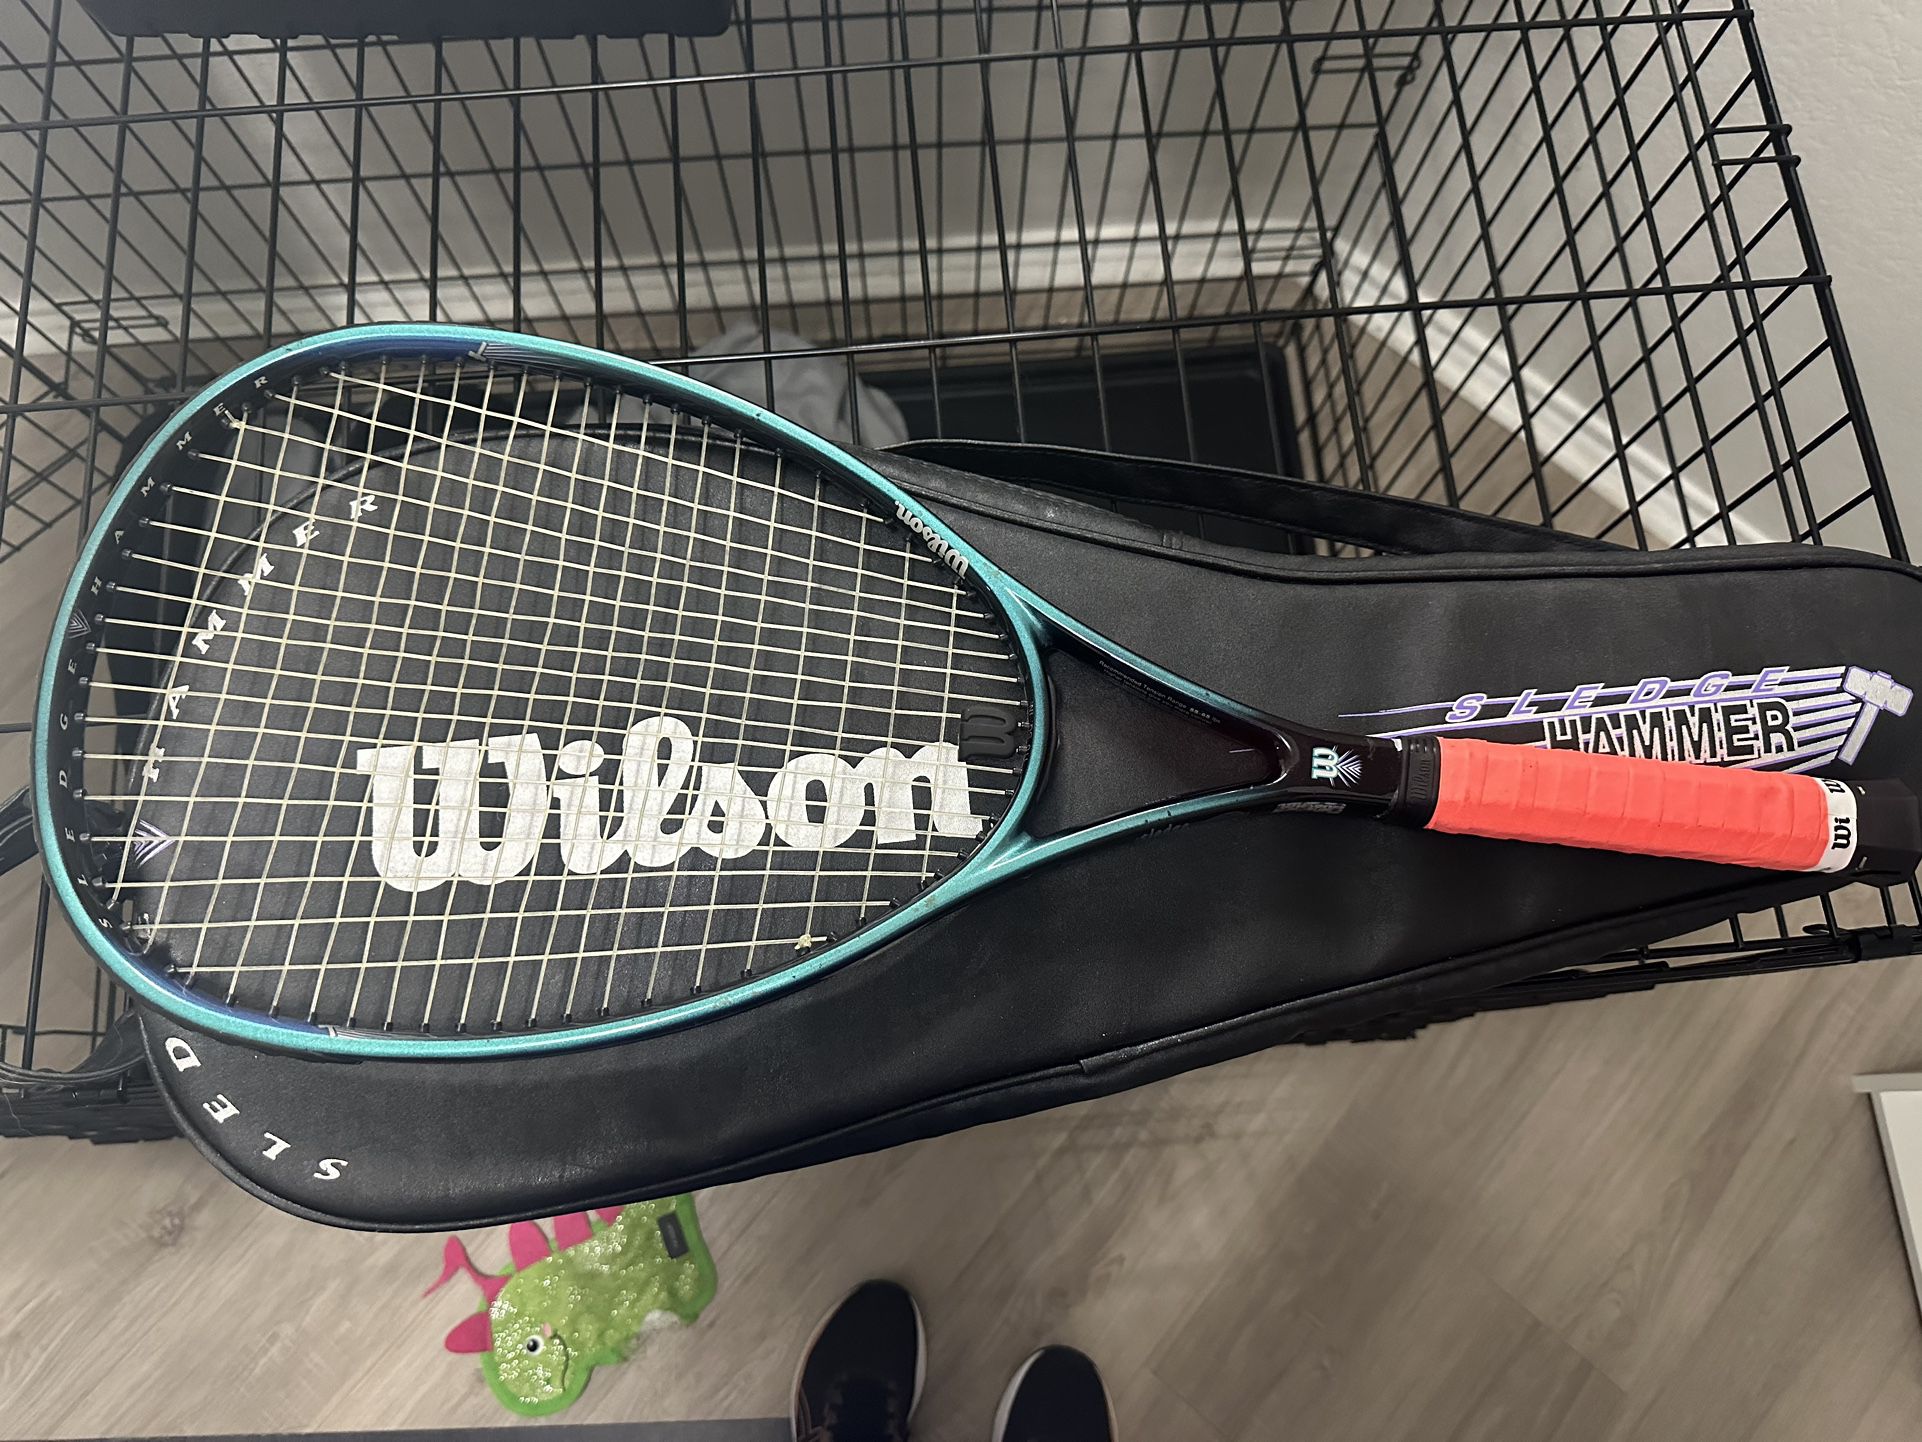 Tennis Racket And Bag (extra Tape In Bag)